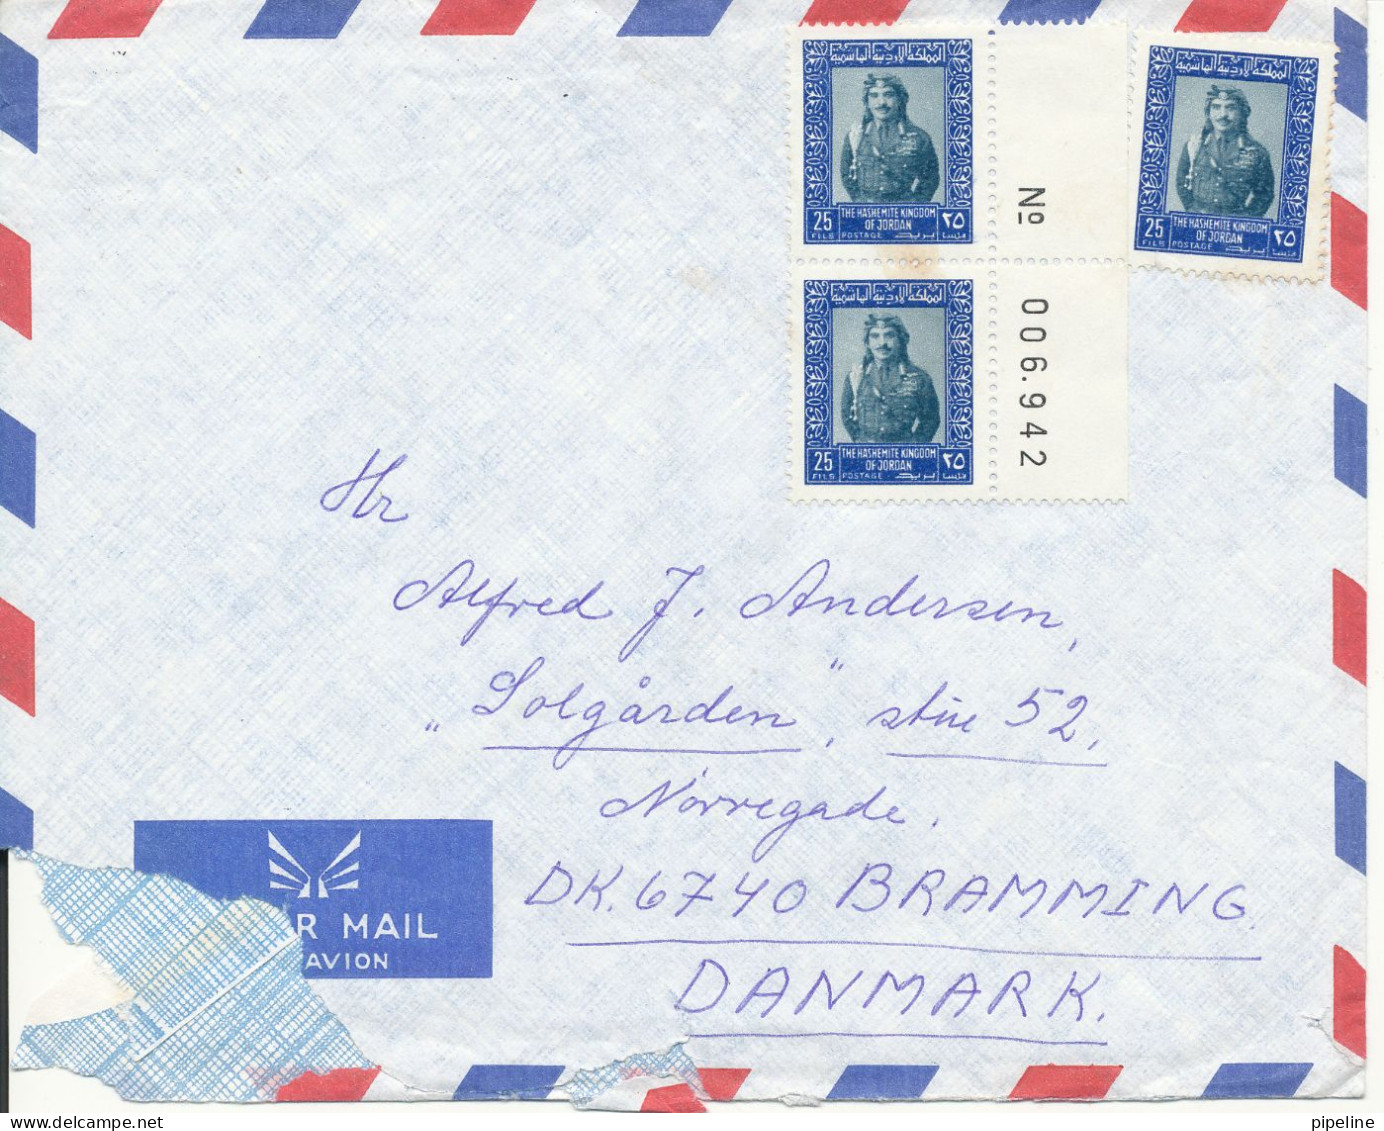 Jordan Air Mail Cover Sent To Denmark 1977 ? No Postmark On The Stamps (sent From UNRWA Temp H.Q.) Cover Damaged In The - Jordanien